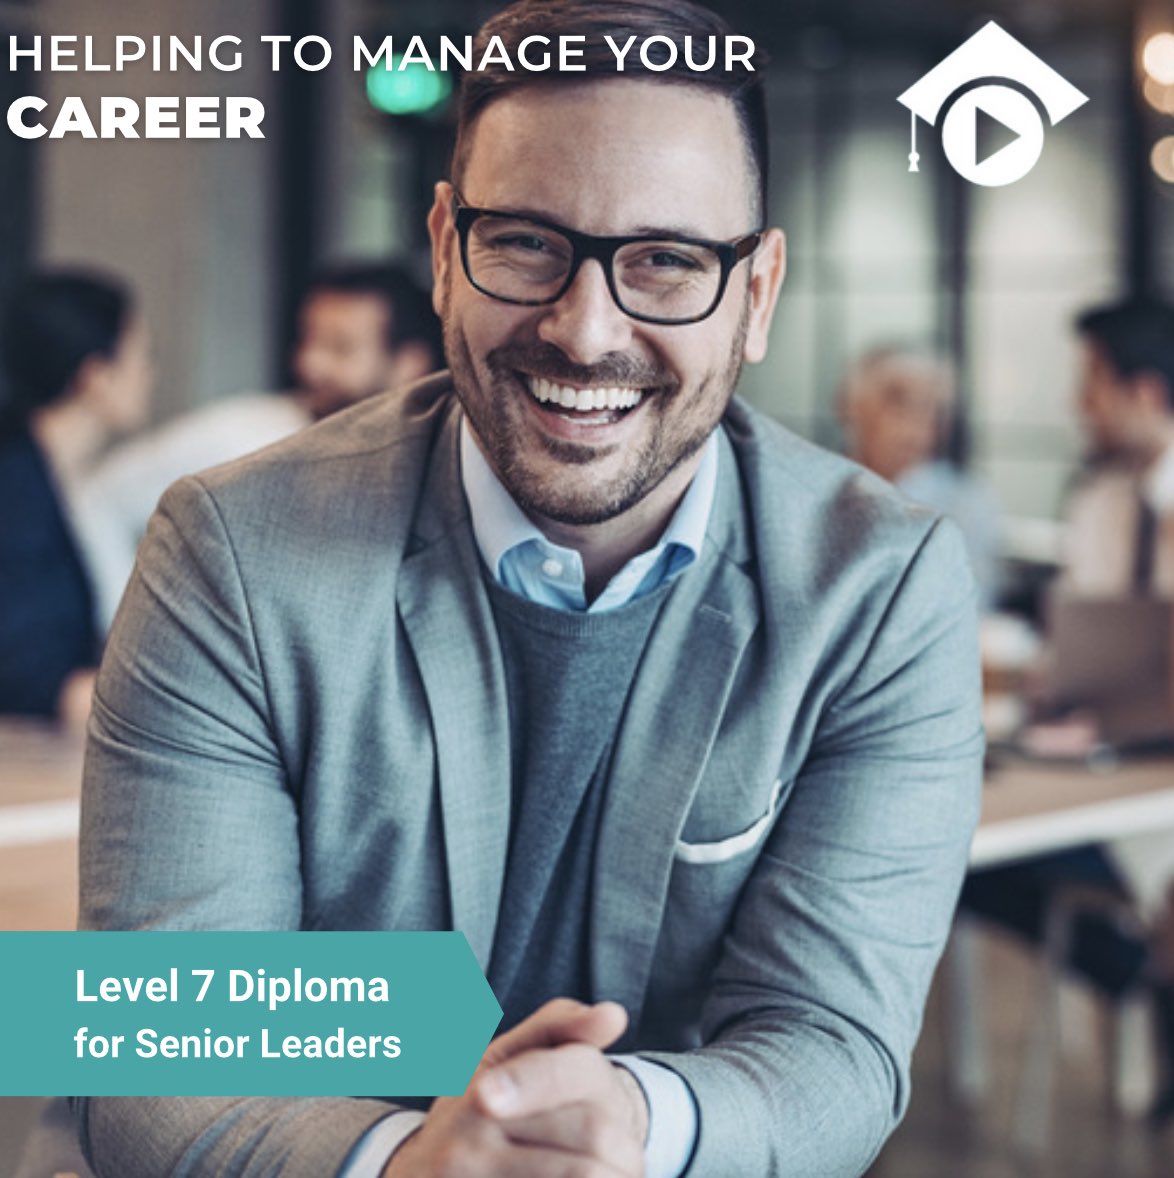 The Level 7 Diploma for Senior Leaders is unit-based, giving you full flexibility to identify the areas of development specific to your own work context and of particular interest and relevance. 

#trustteach #distancelearning #education #training #cpd